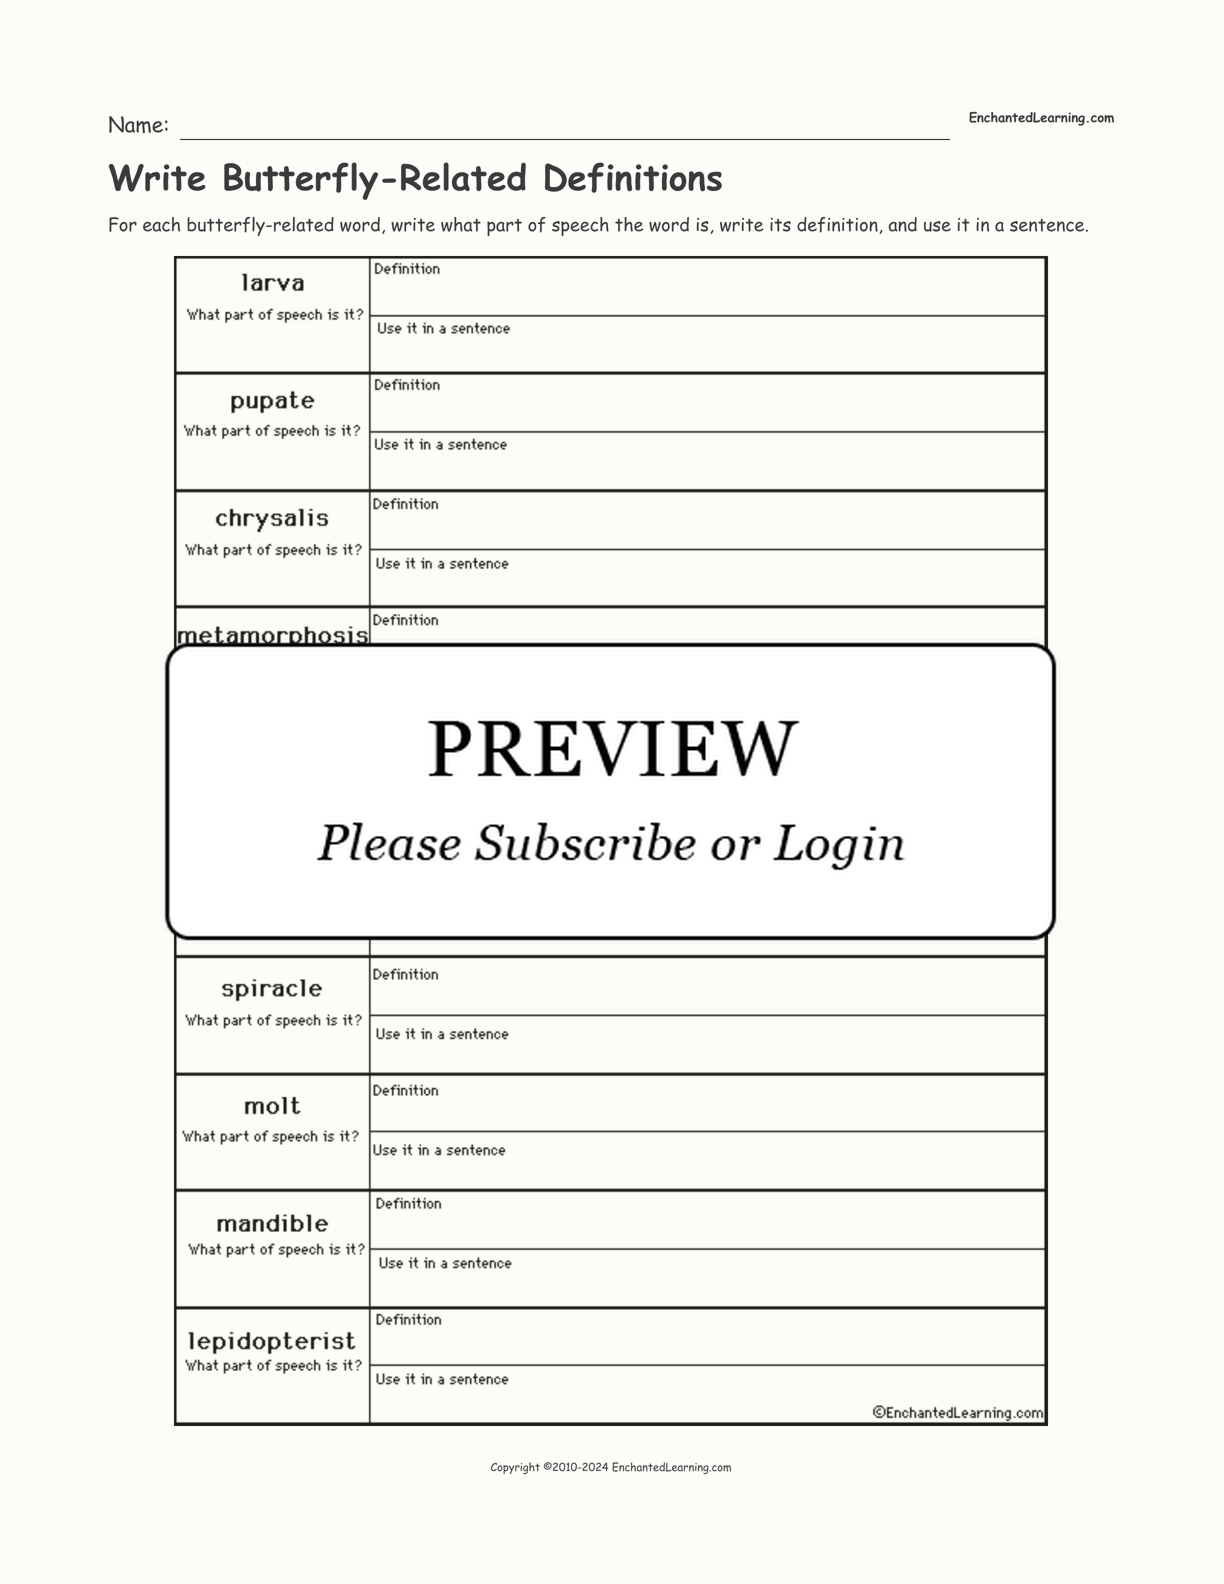 Write Butterfly-Related Definitions interactive worksheet page 1